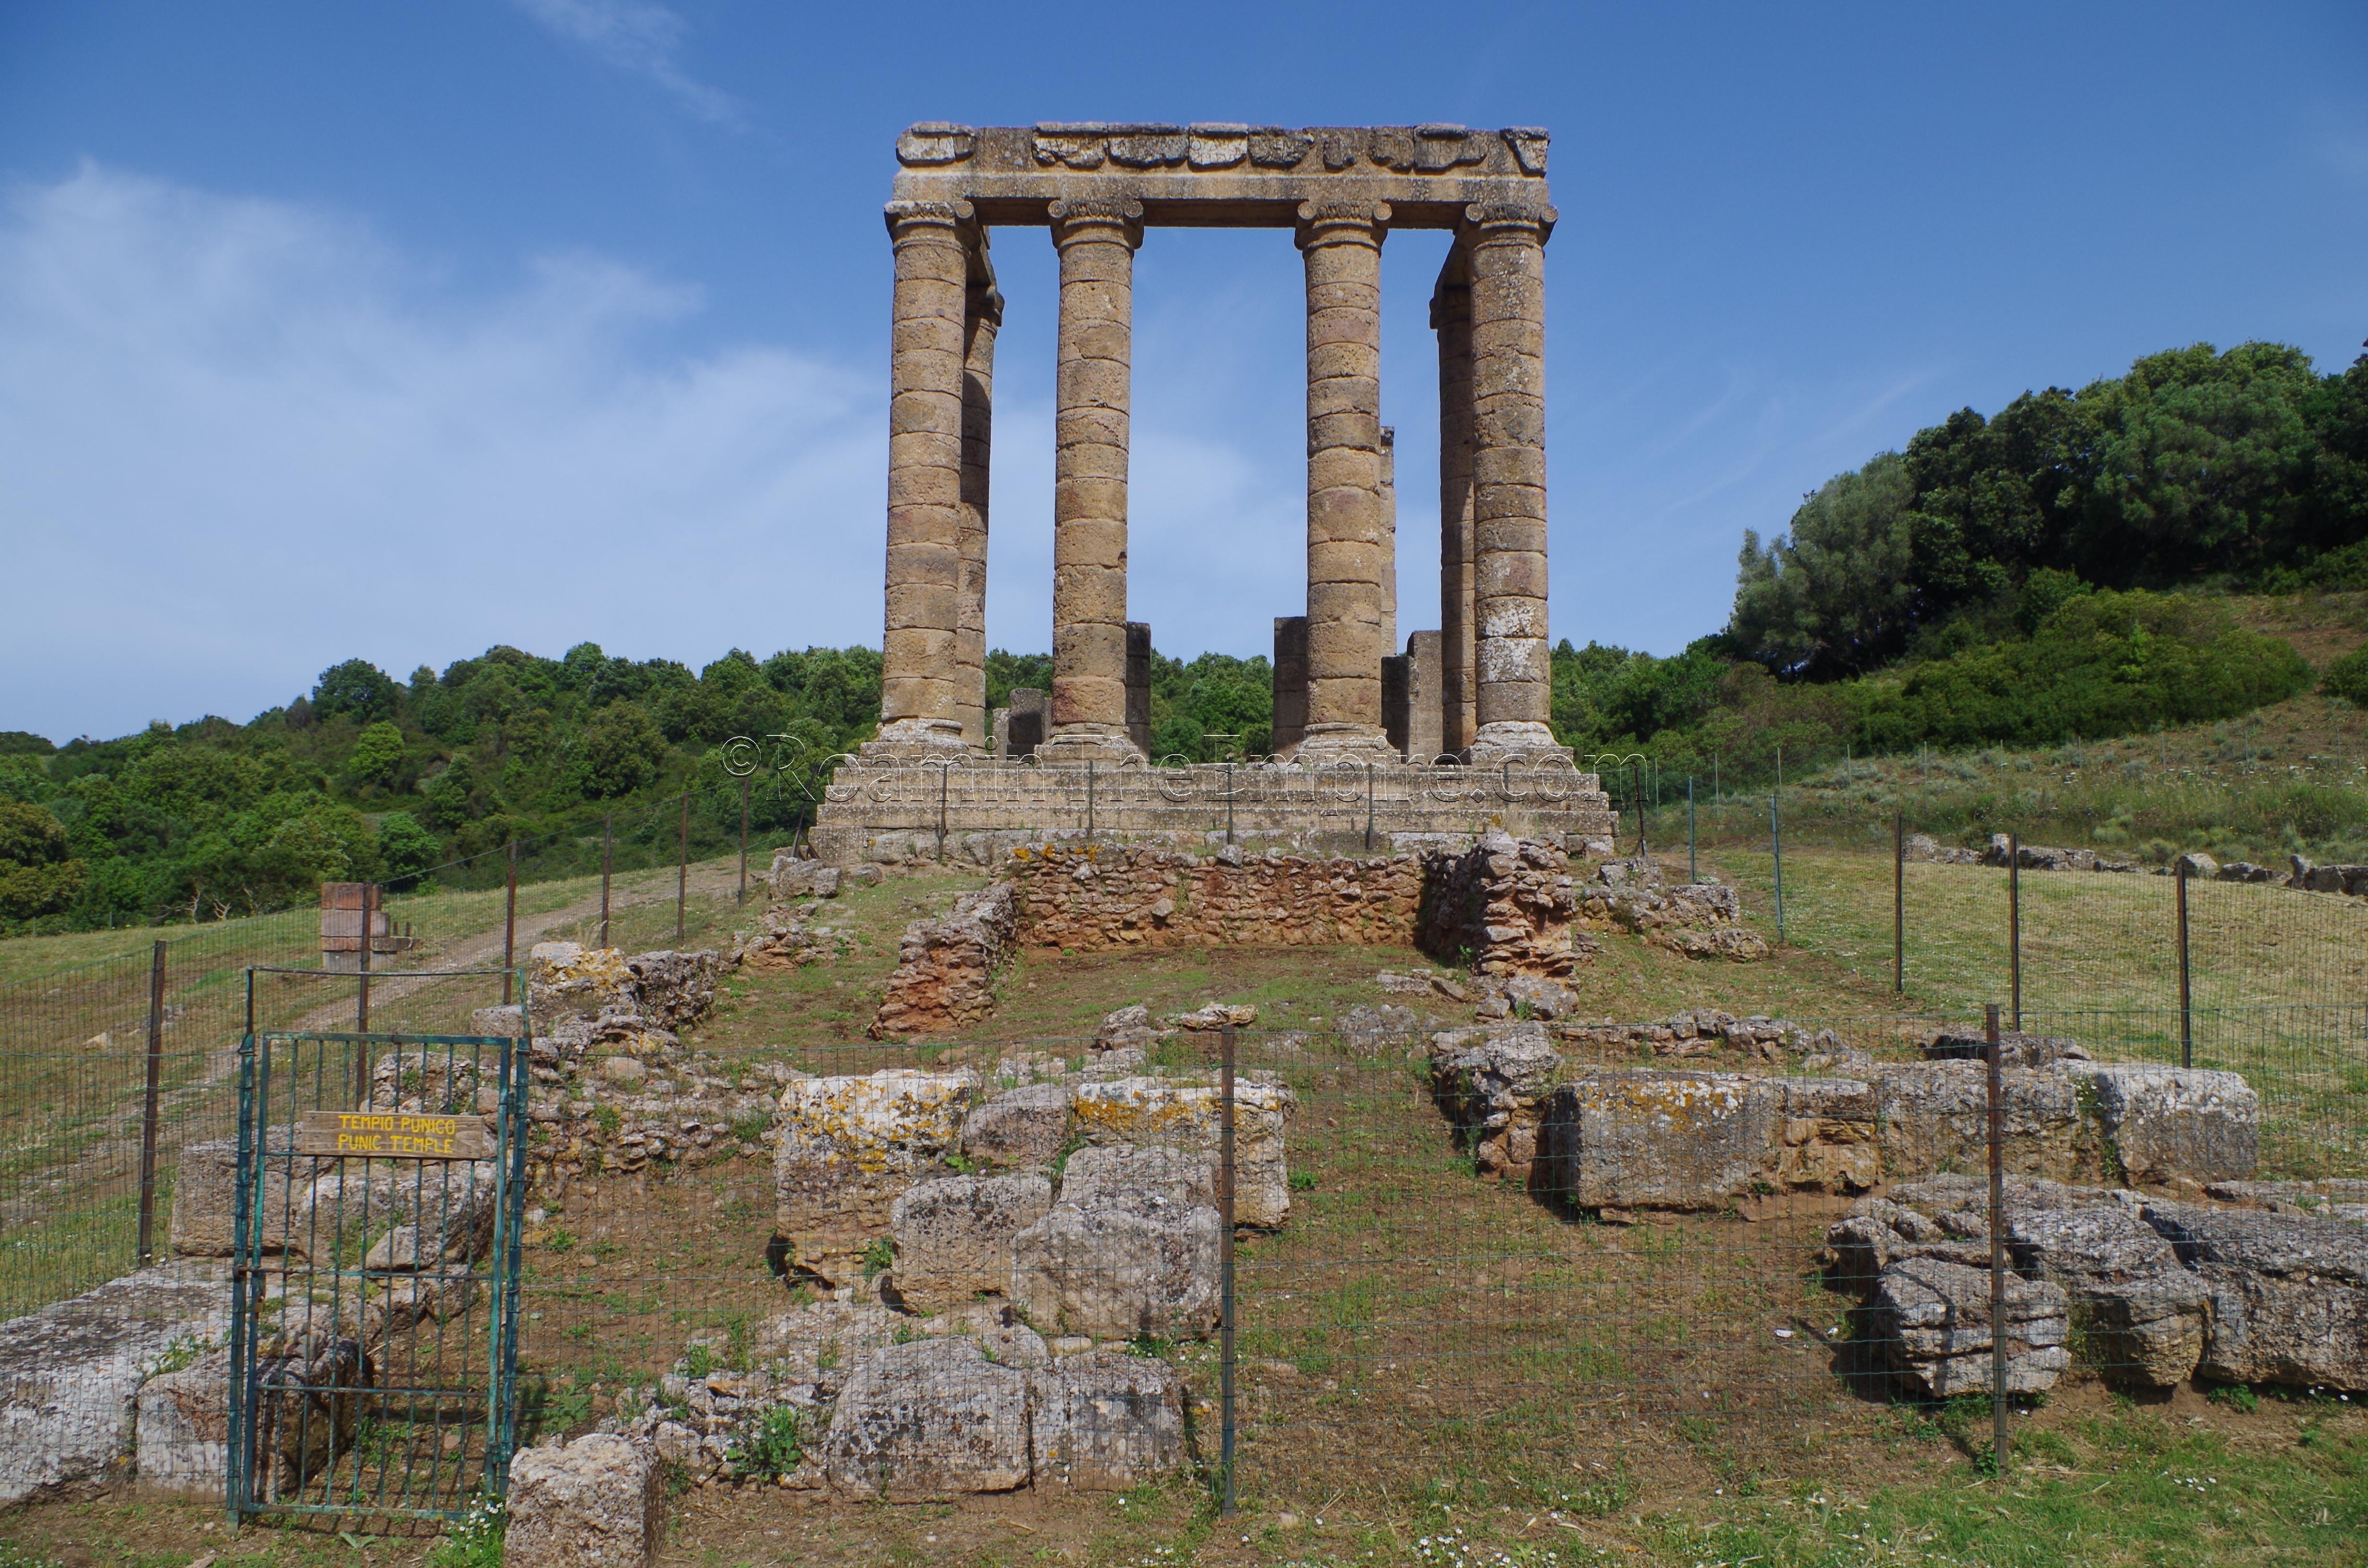 Punic era temple in front of the Temple of Antas.